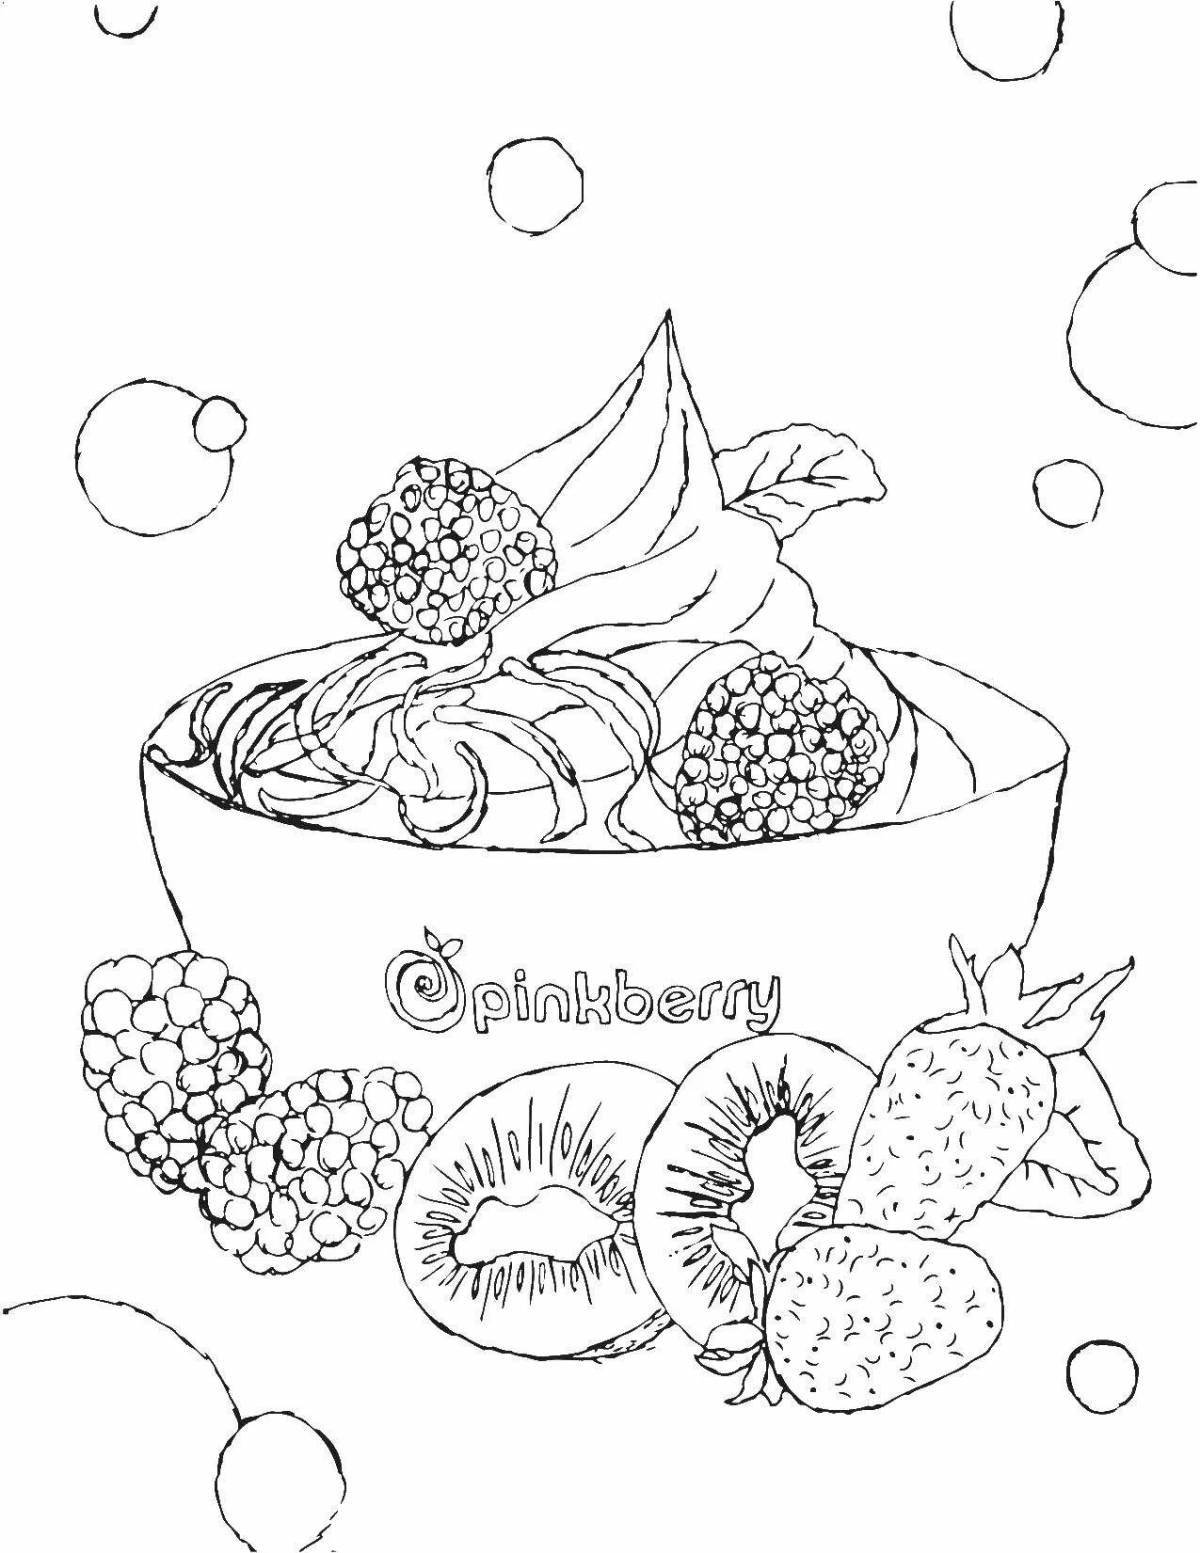 Colorful fruit salad coloring page for kids